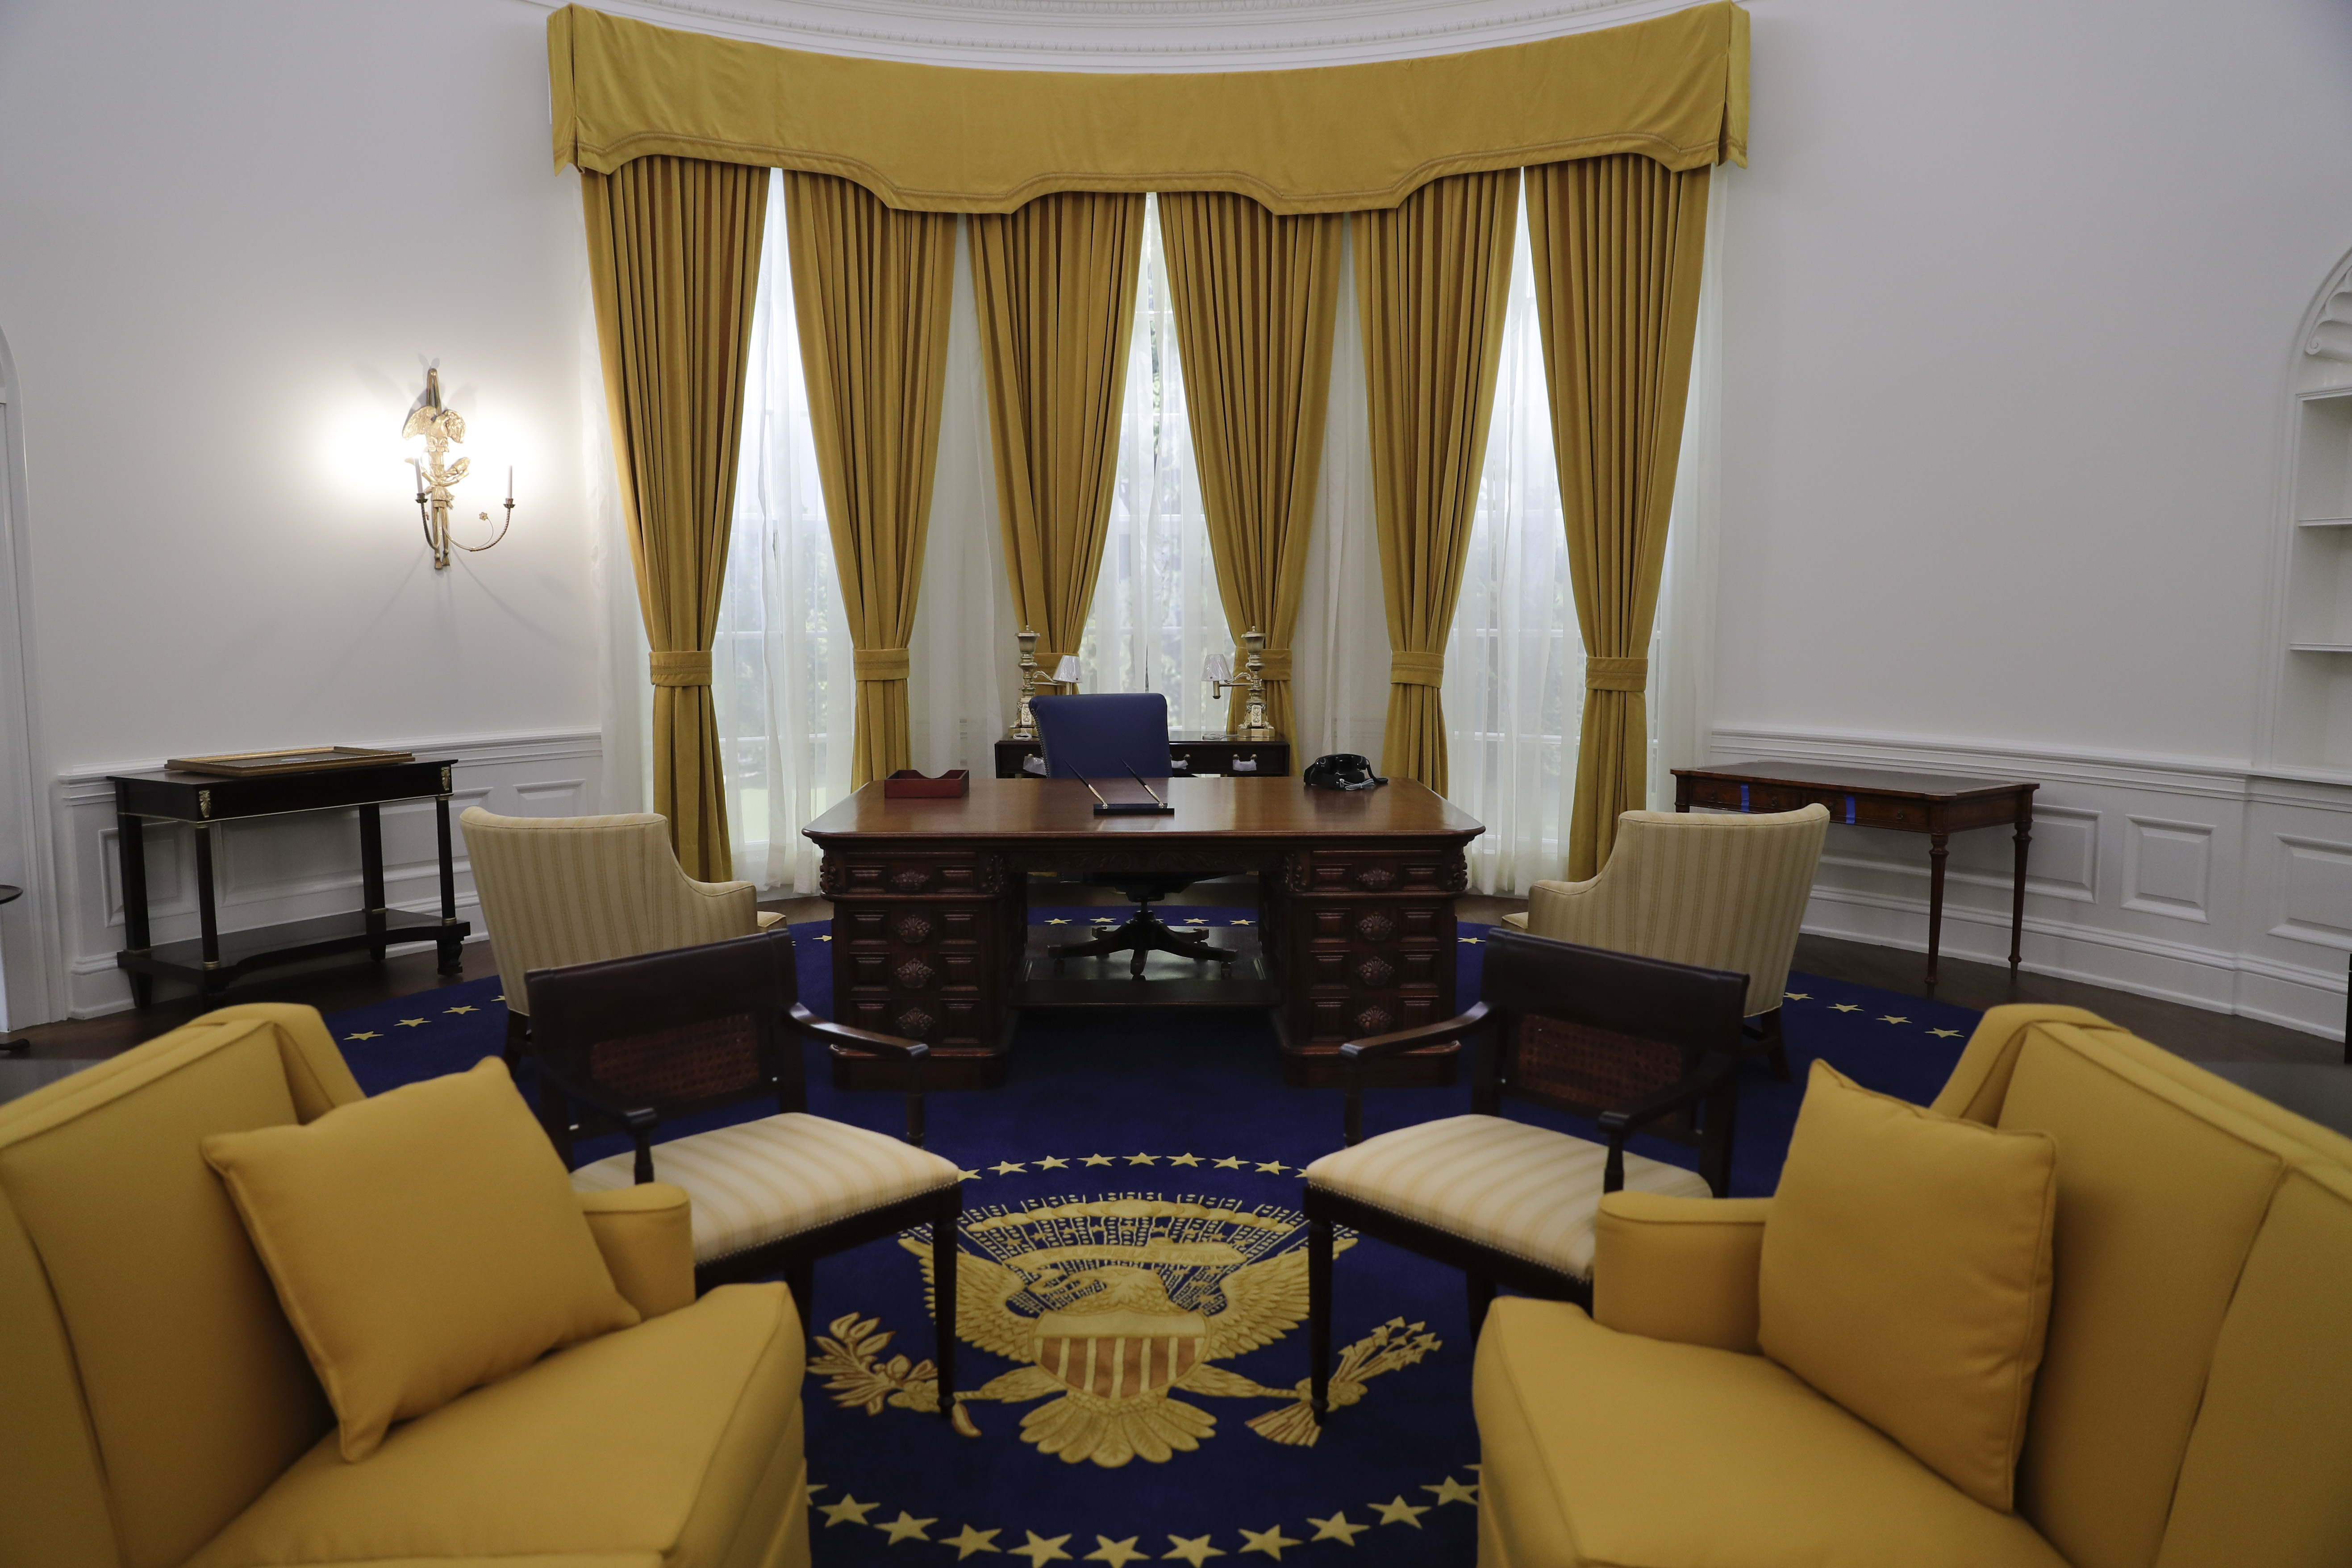 In this Wednesday, Oct. 5, 2016 photo, a life-size replica of the Oval Office where former President Richard Nixon worked in the White House is exhibited in the museum at the Richard Nixon Presidential Library and Museum in Yorba Linda, Calif. The museum will reopen Friday, Oct. 14, following a $15 million makeover aimed at bringing the country’s 37th president closer to younger generations less familiar with his groundbreaking trip to China or the Watergate scandal. (AP Photo/Jae C. Hong)